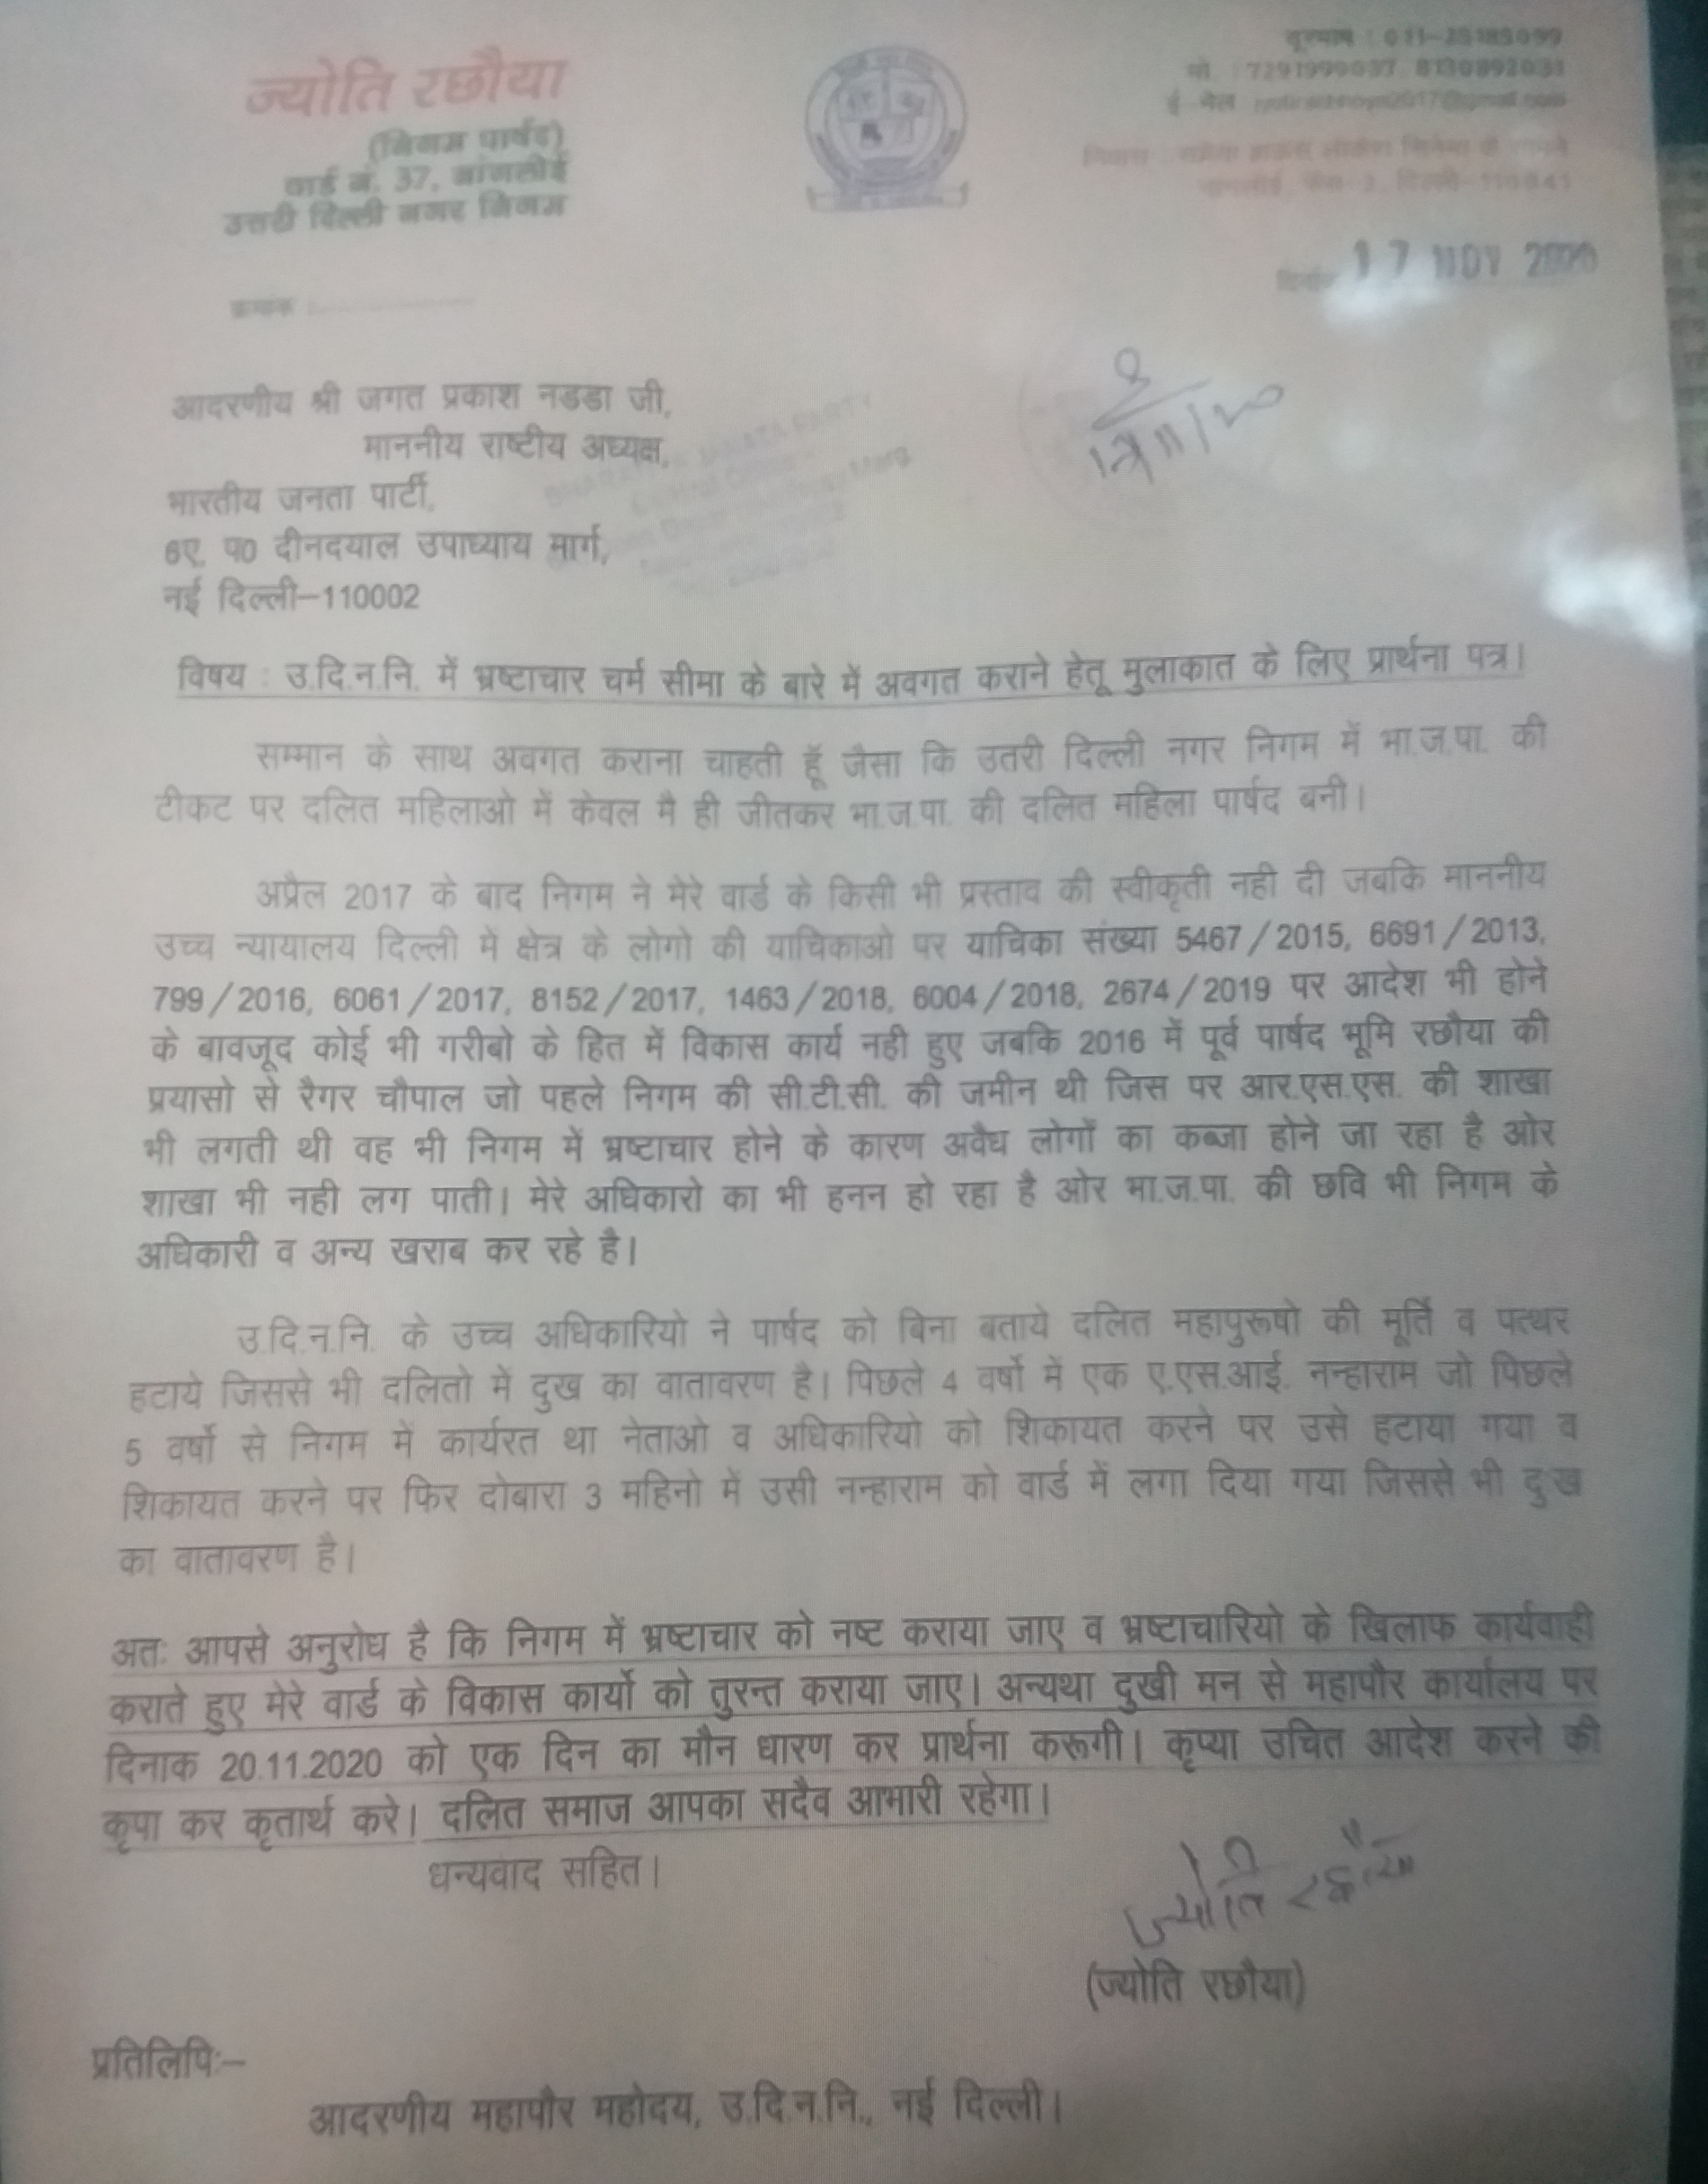 BJP councilor Jyoti Rachhoya wrote complaint letter to JP Nadda about corruption in North MCD